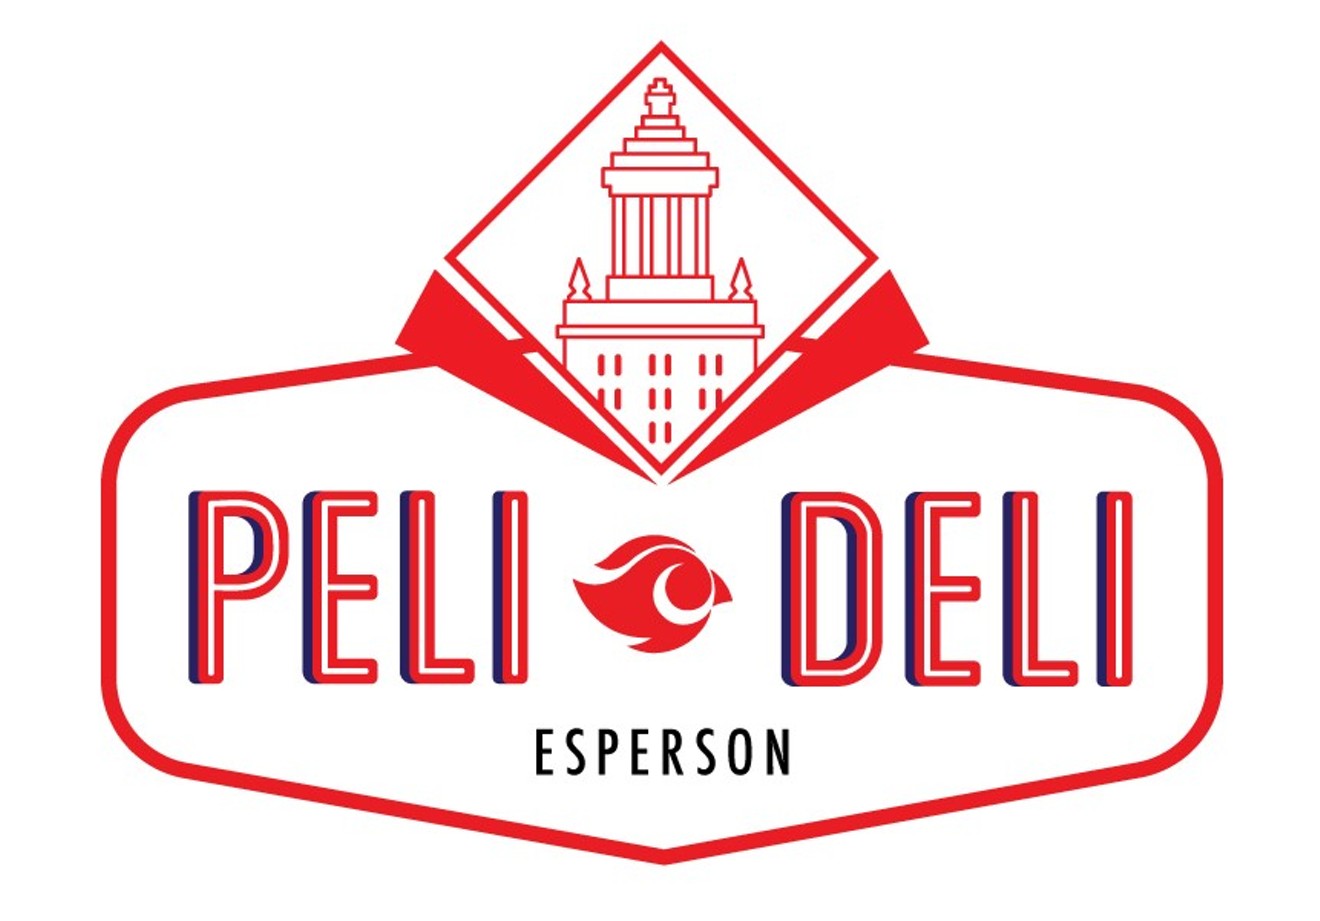 The new Peli Deli will begin a nine-month pop-up series inside the Esperson Building at 808 Travis.